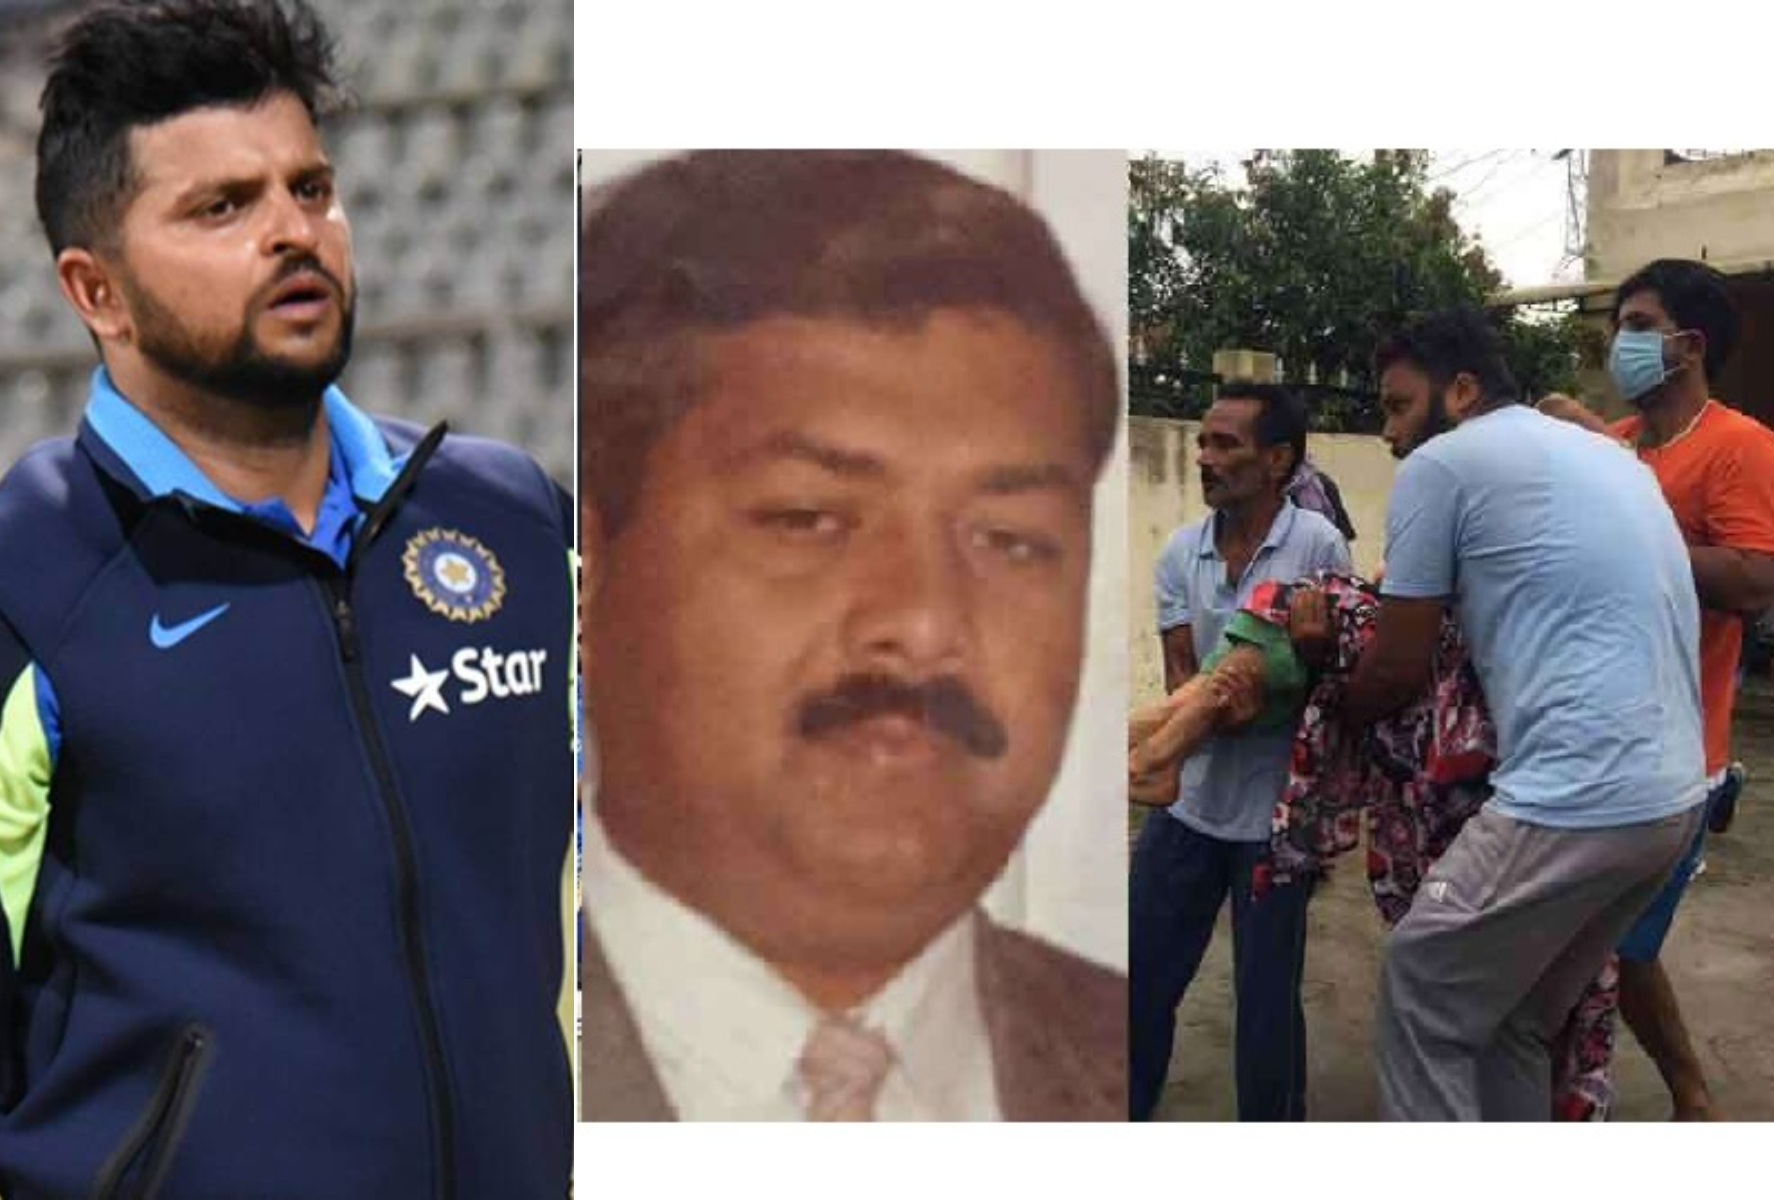 Suresh Raina lost his uncle Ashok Kumar and cousin Kaushal in the attack on Aug 31